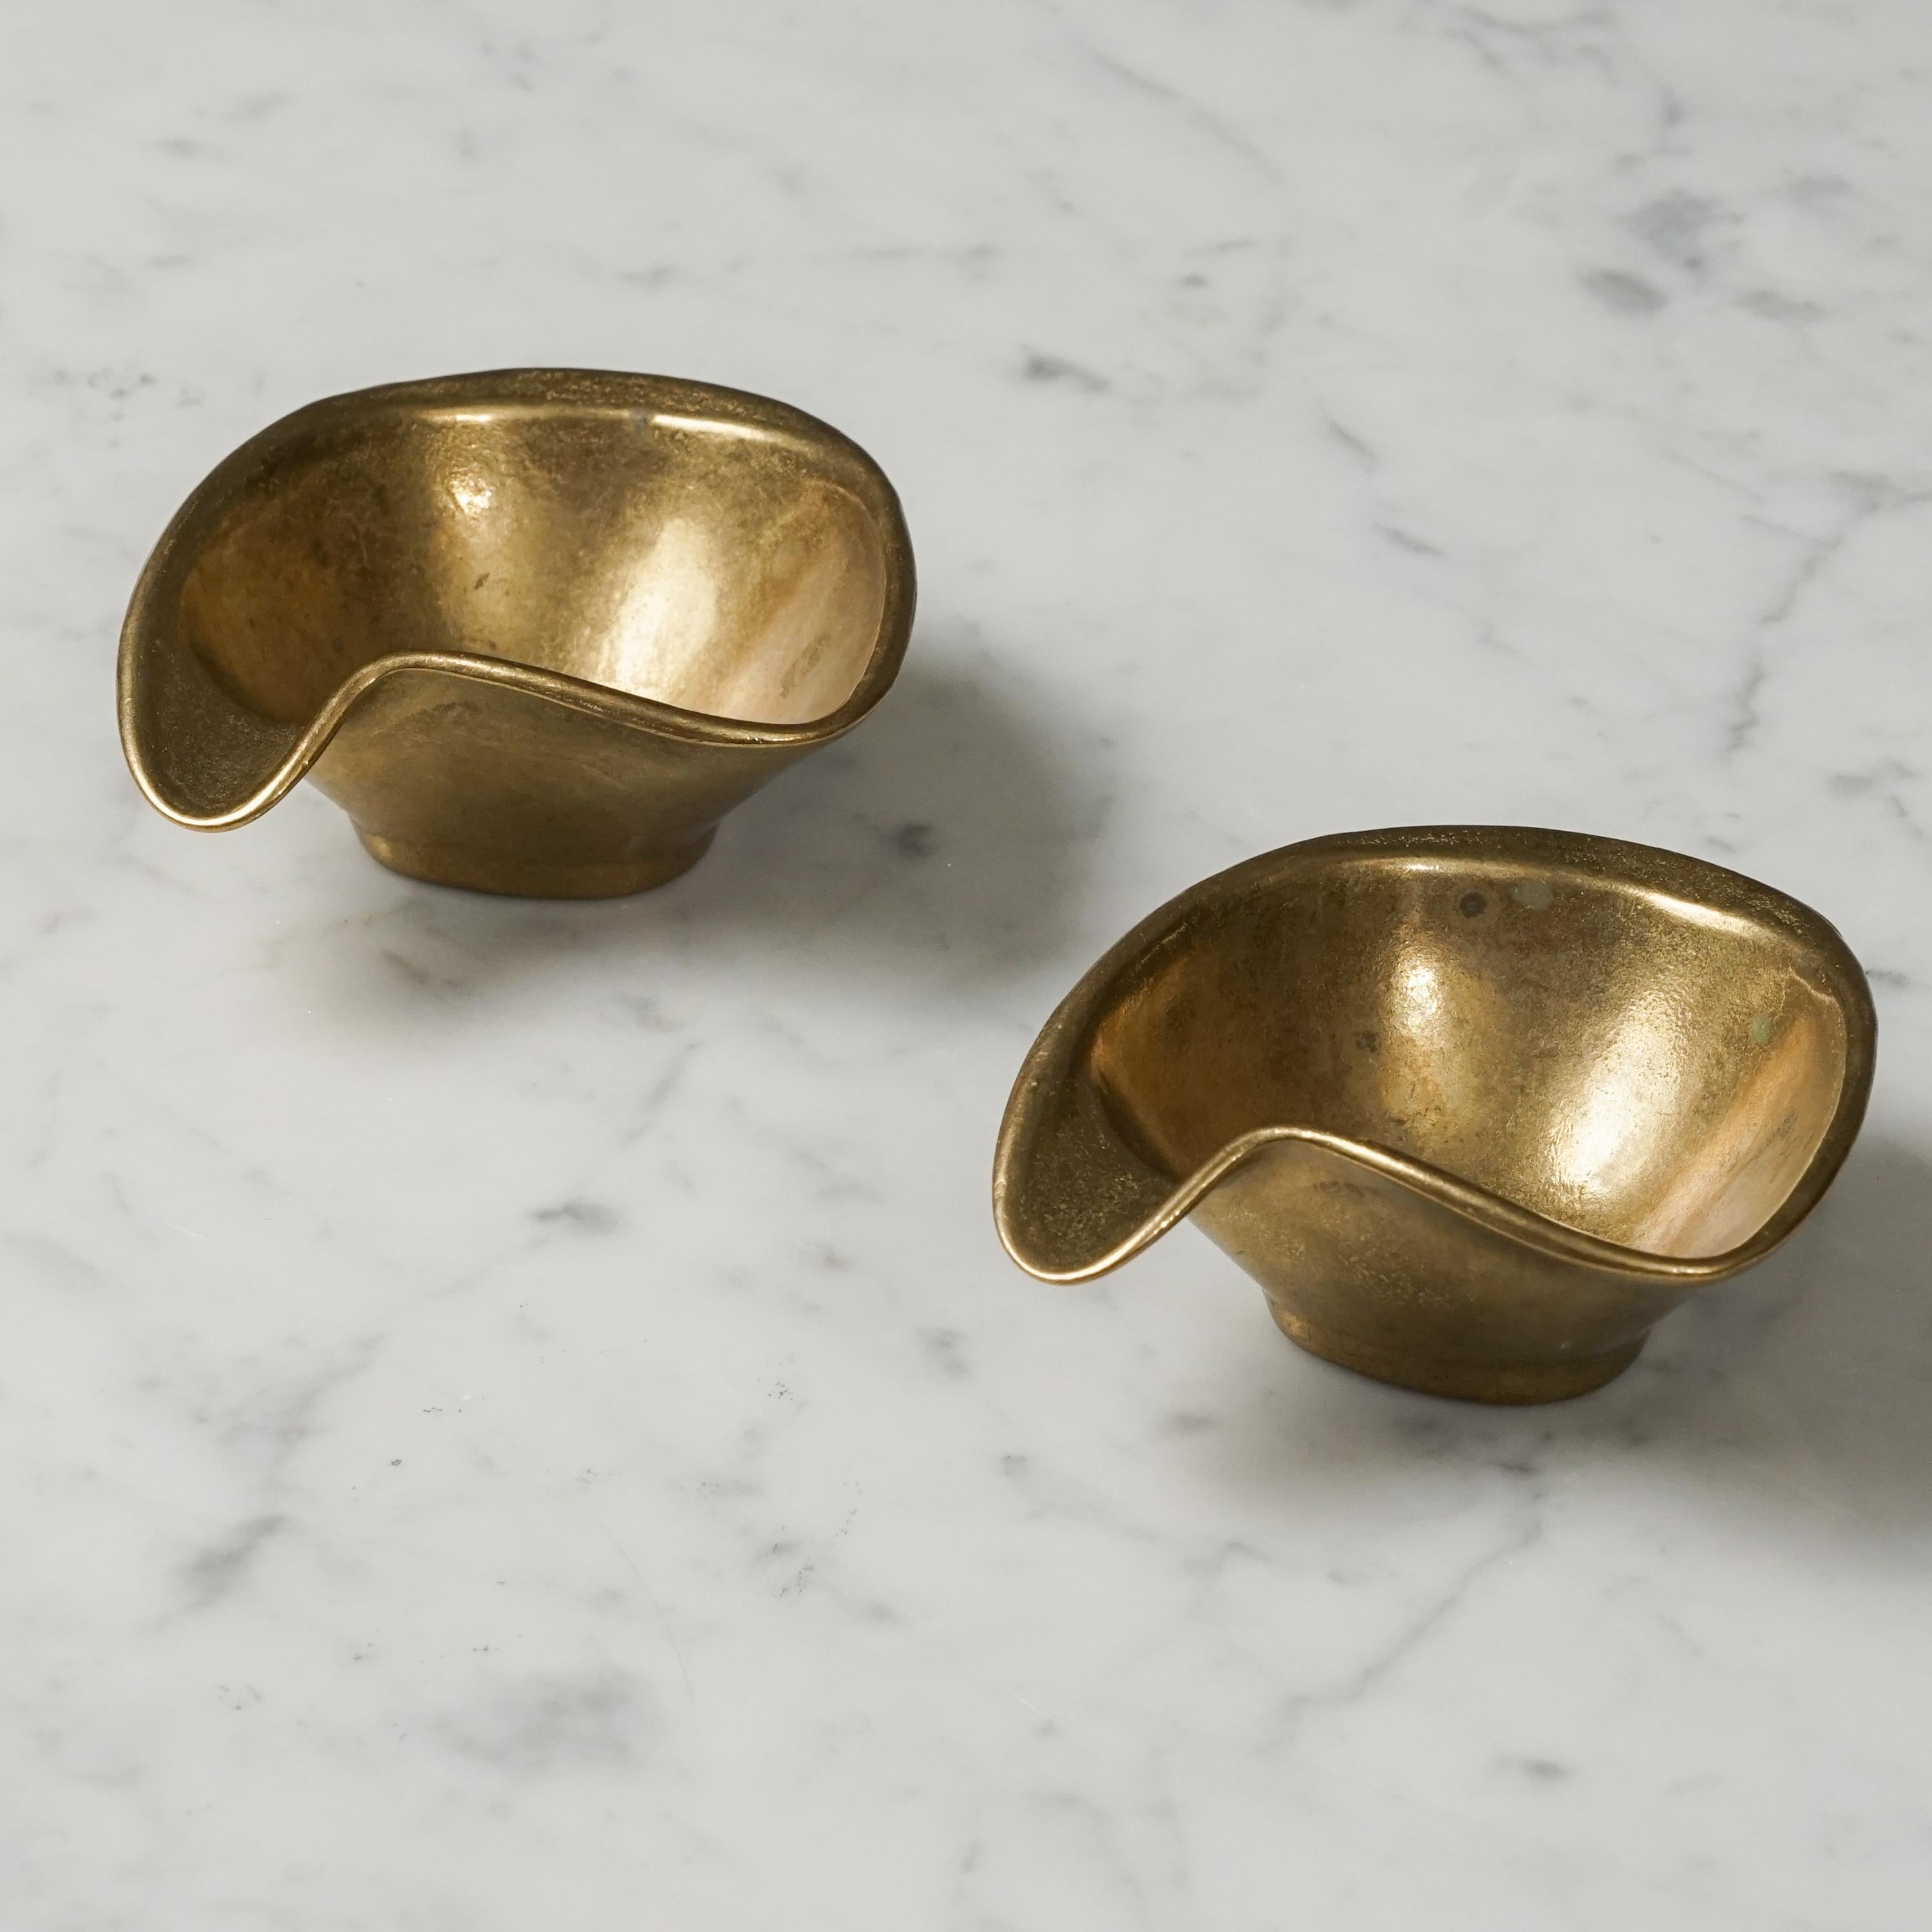 Finnish Set of Two Scandinavian Modern Nesting Brass Ashtrays from the, Mid-1900s For Sale